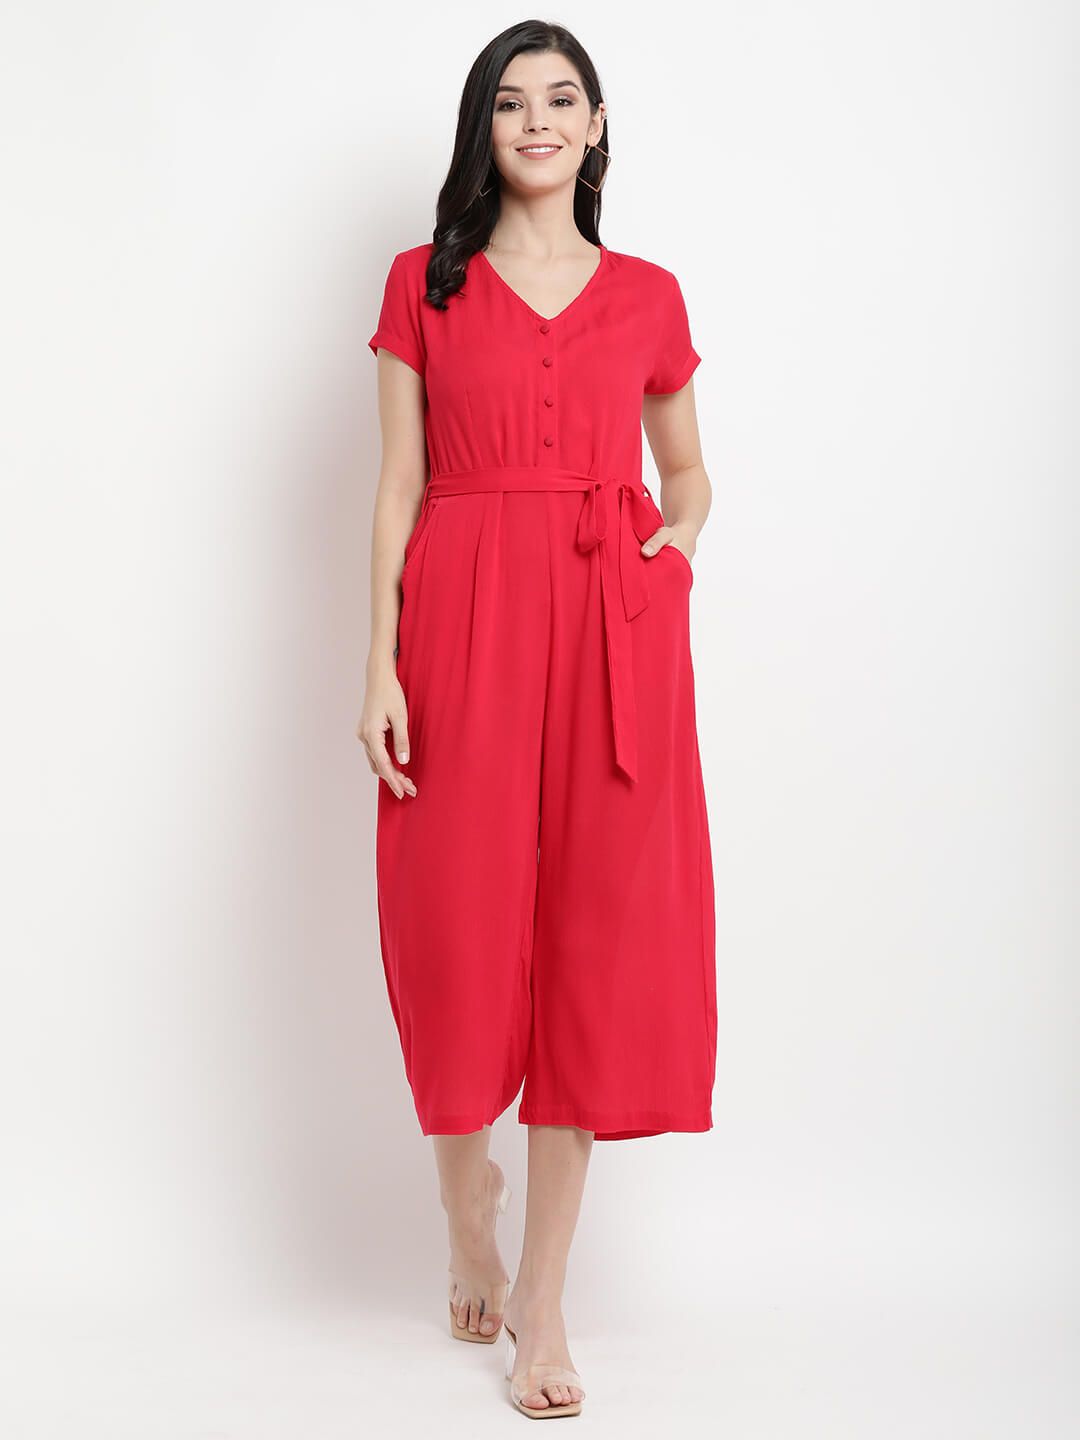 The Vanca Women Red Culotte Jumpsuit with Ruffles Price in India